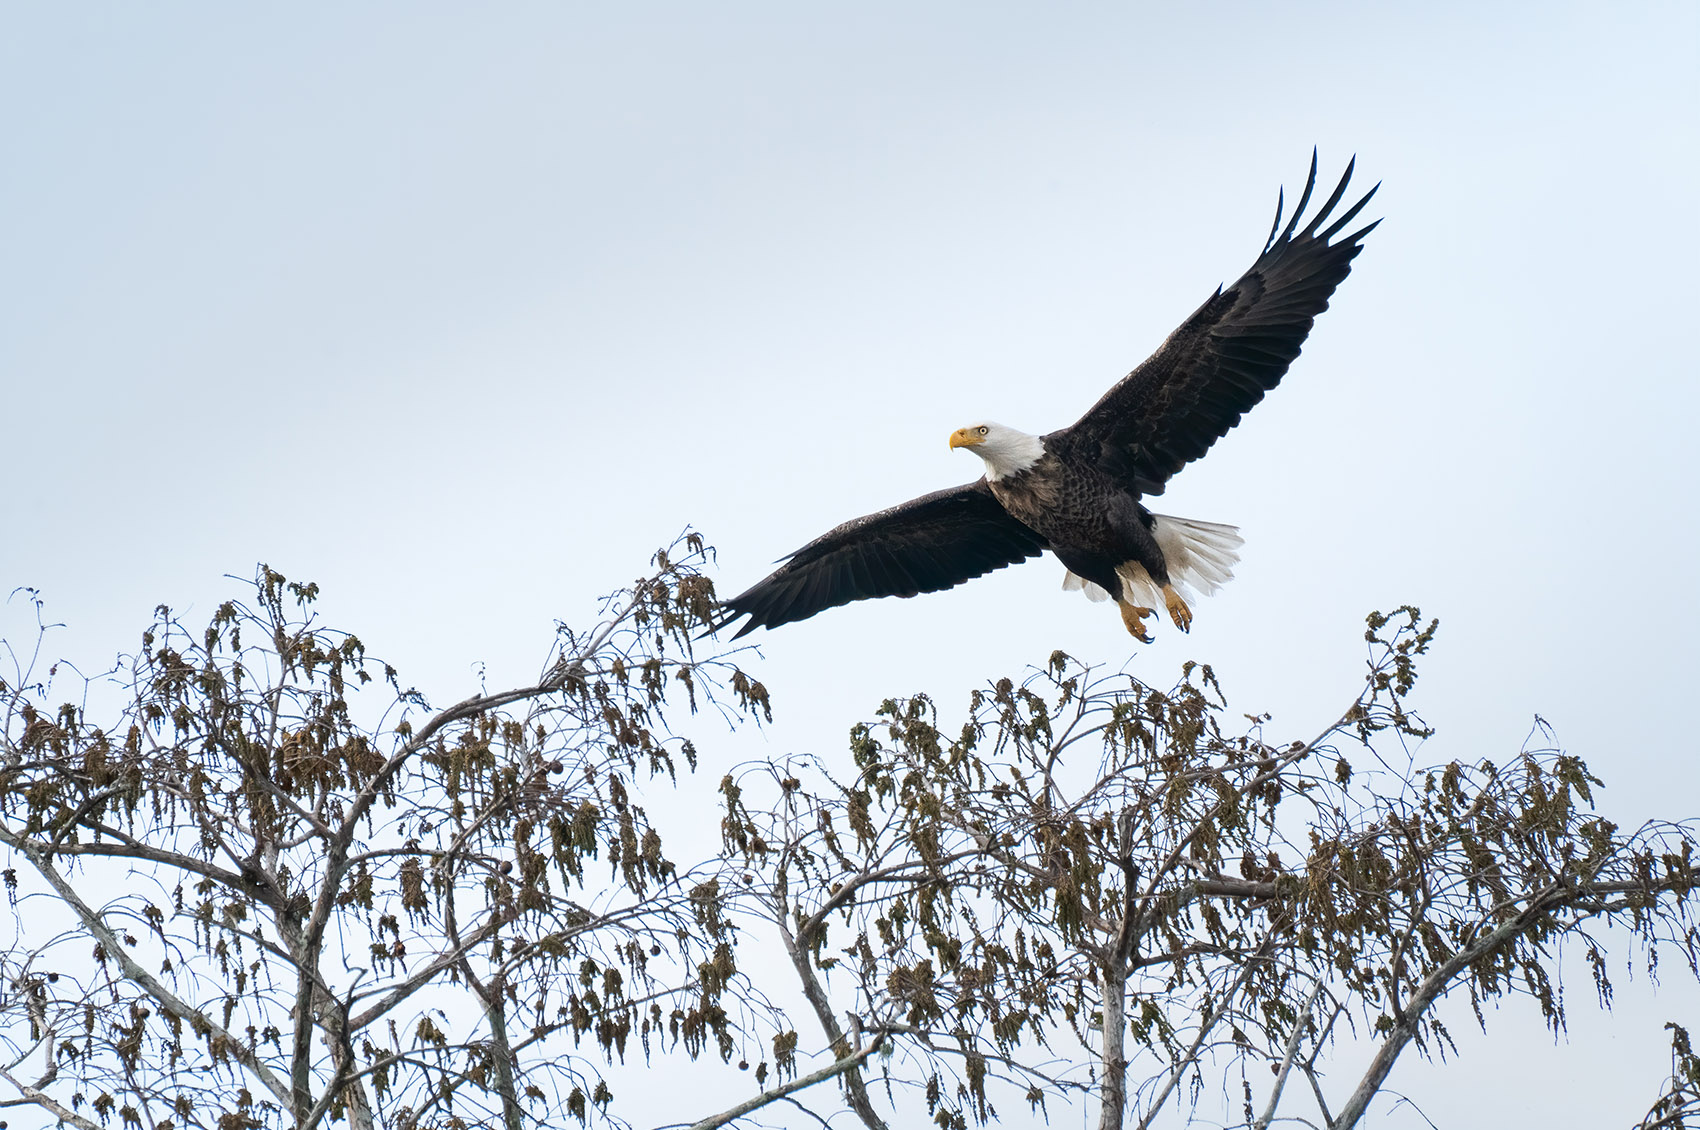 bald eagle soaring over trees in a south Louisiana swamp featured in Louisiana nature photography